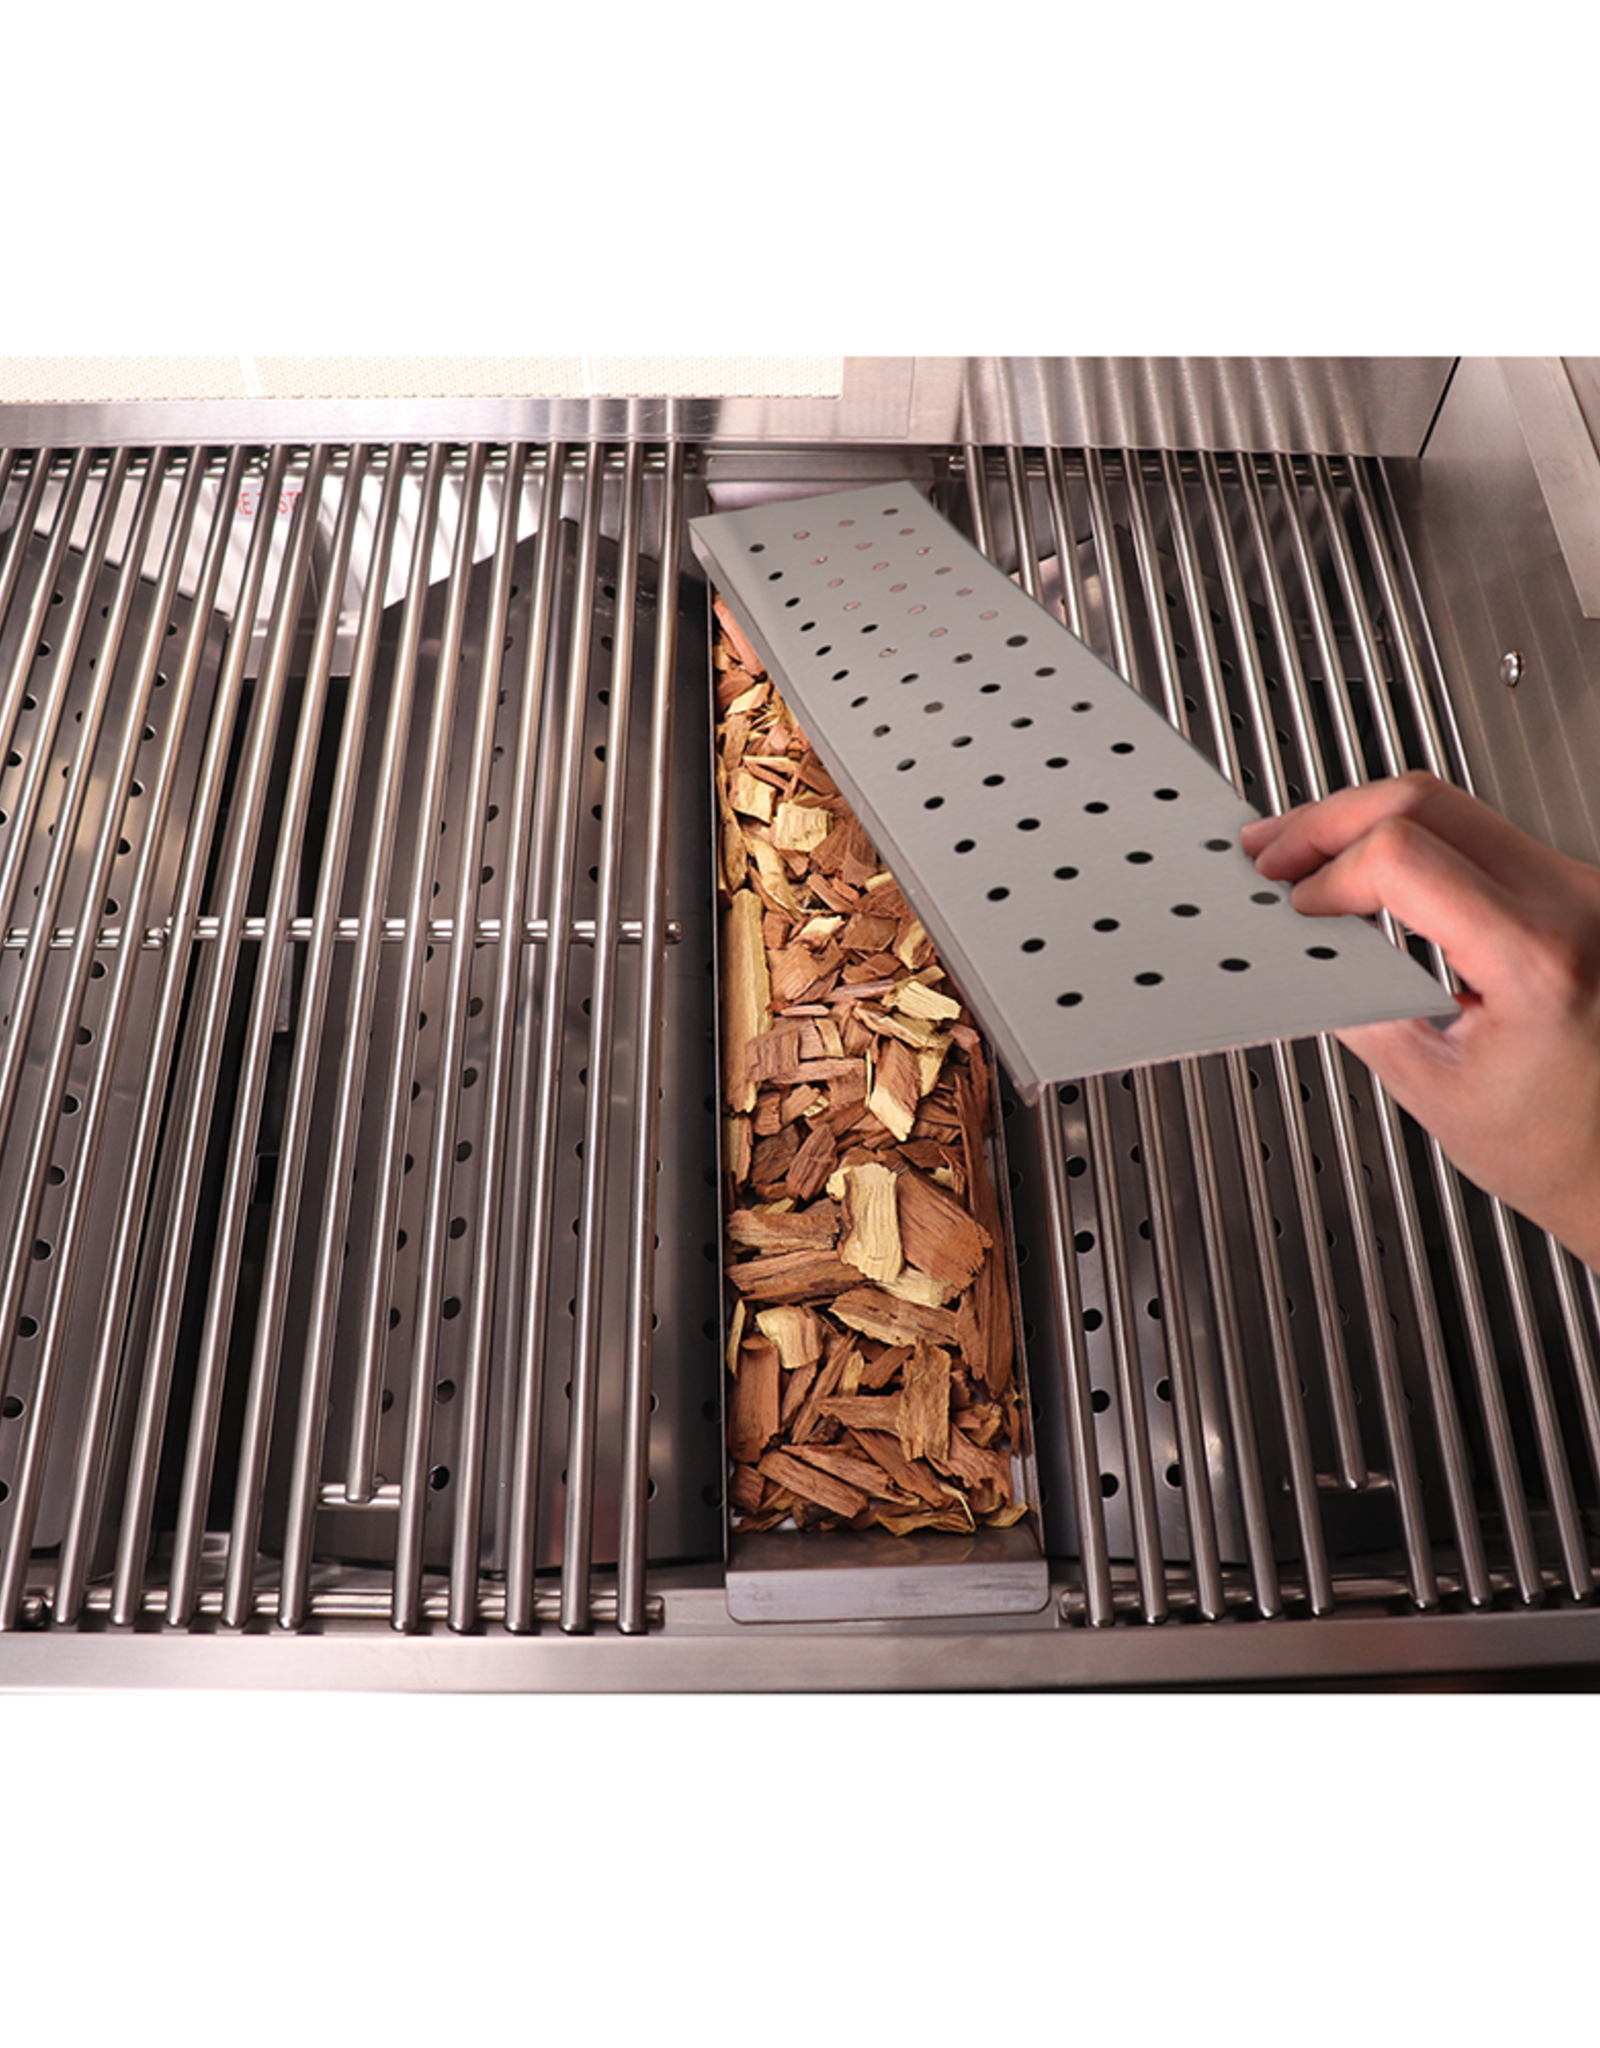 Renaissance Cooking Systems Renaissance Cooking Systems Stainless Steel Smoker Tray for Cutlass Pro Series Grills - RST3042